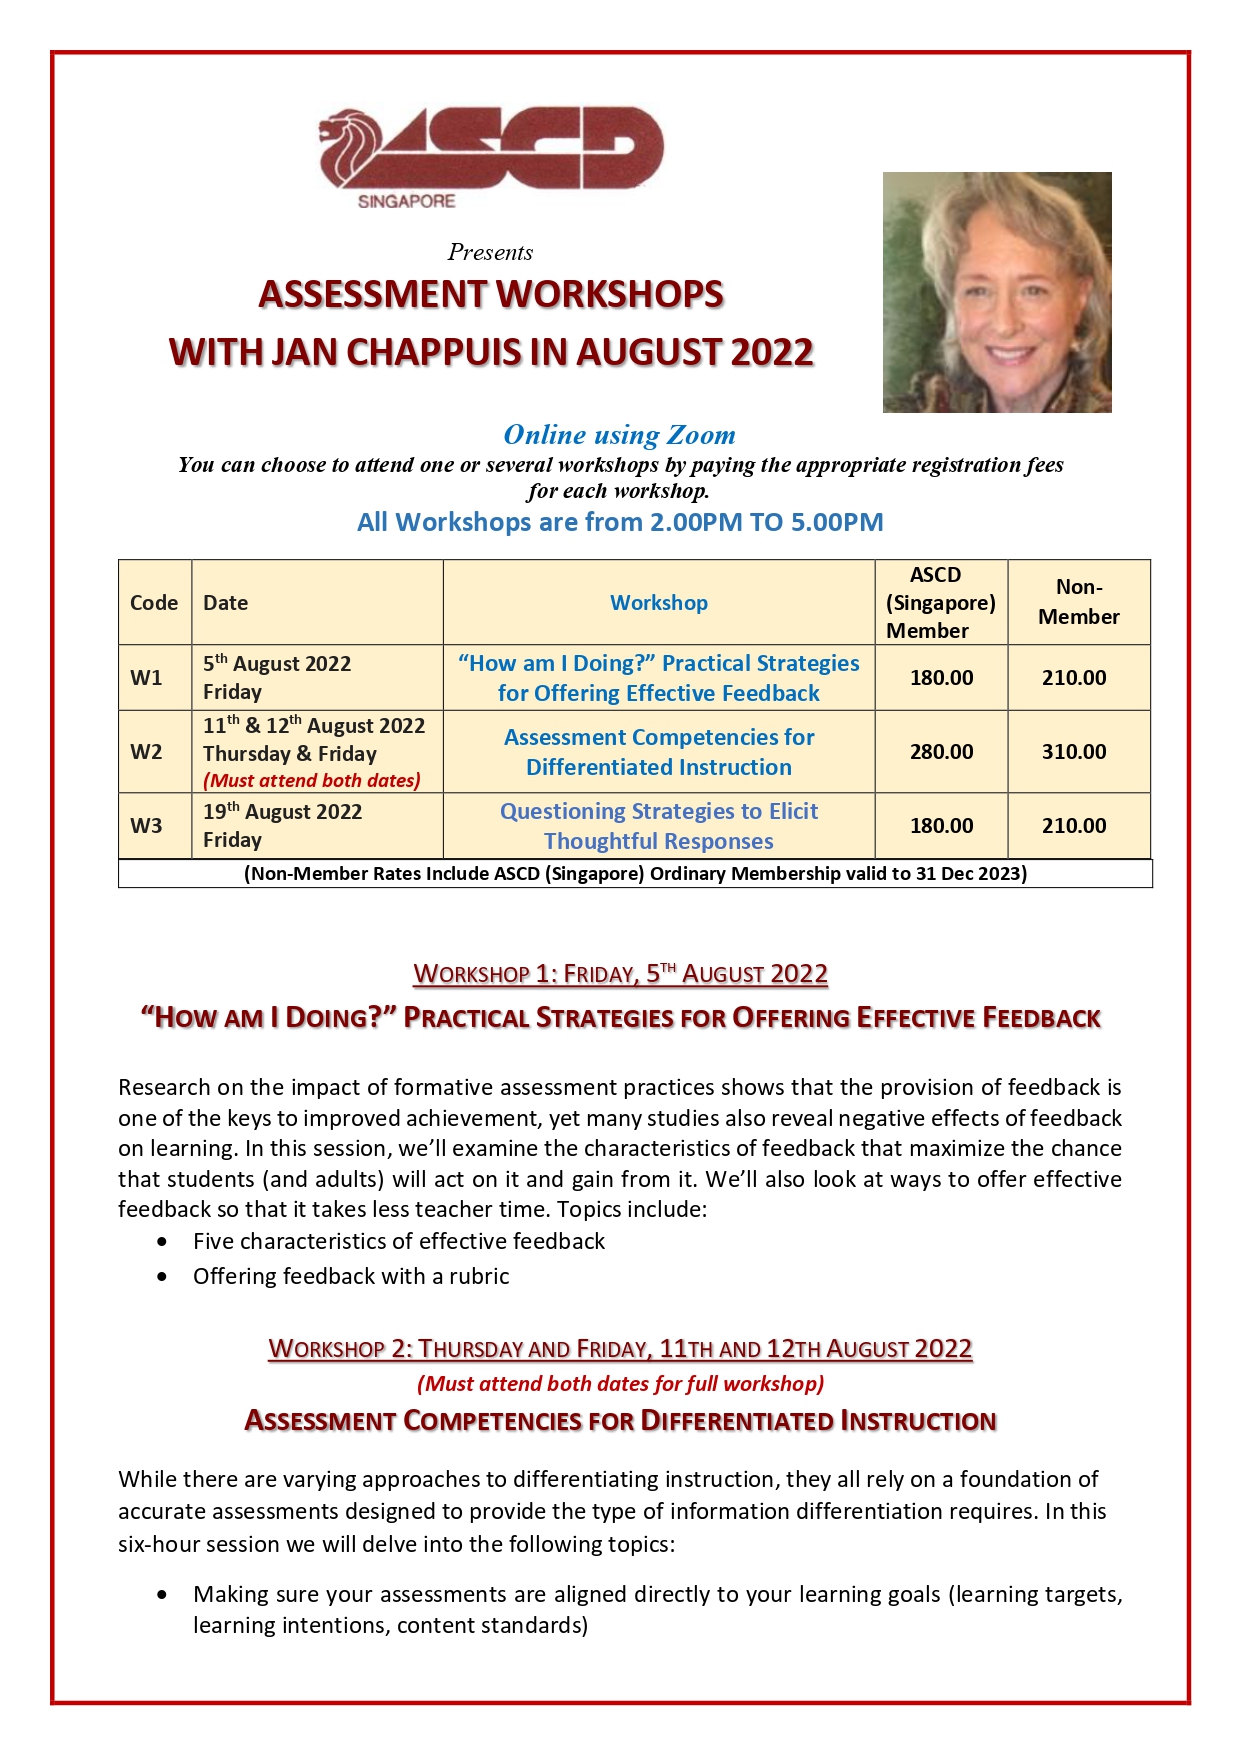 01-ASCD (S) August 2022 Assessment Workshops by Jan Chappuis_page-0001.jpg